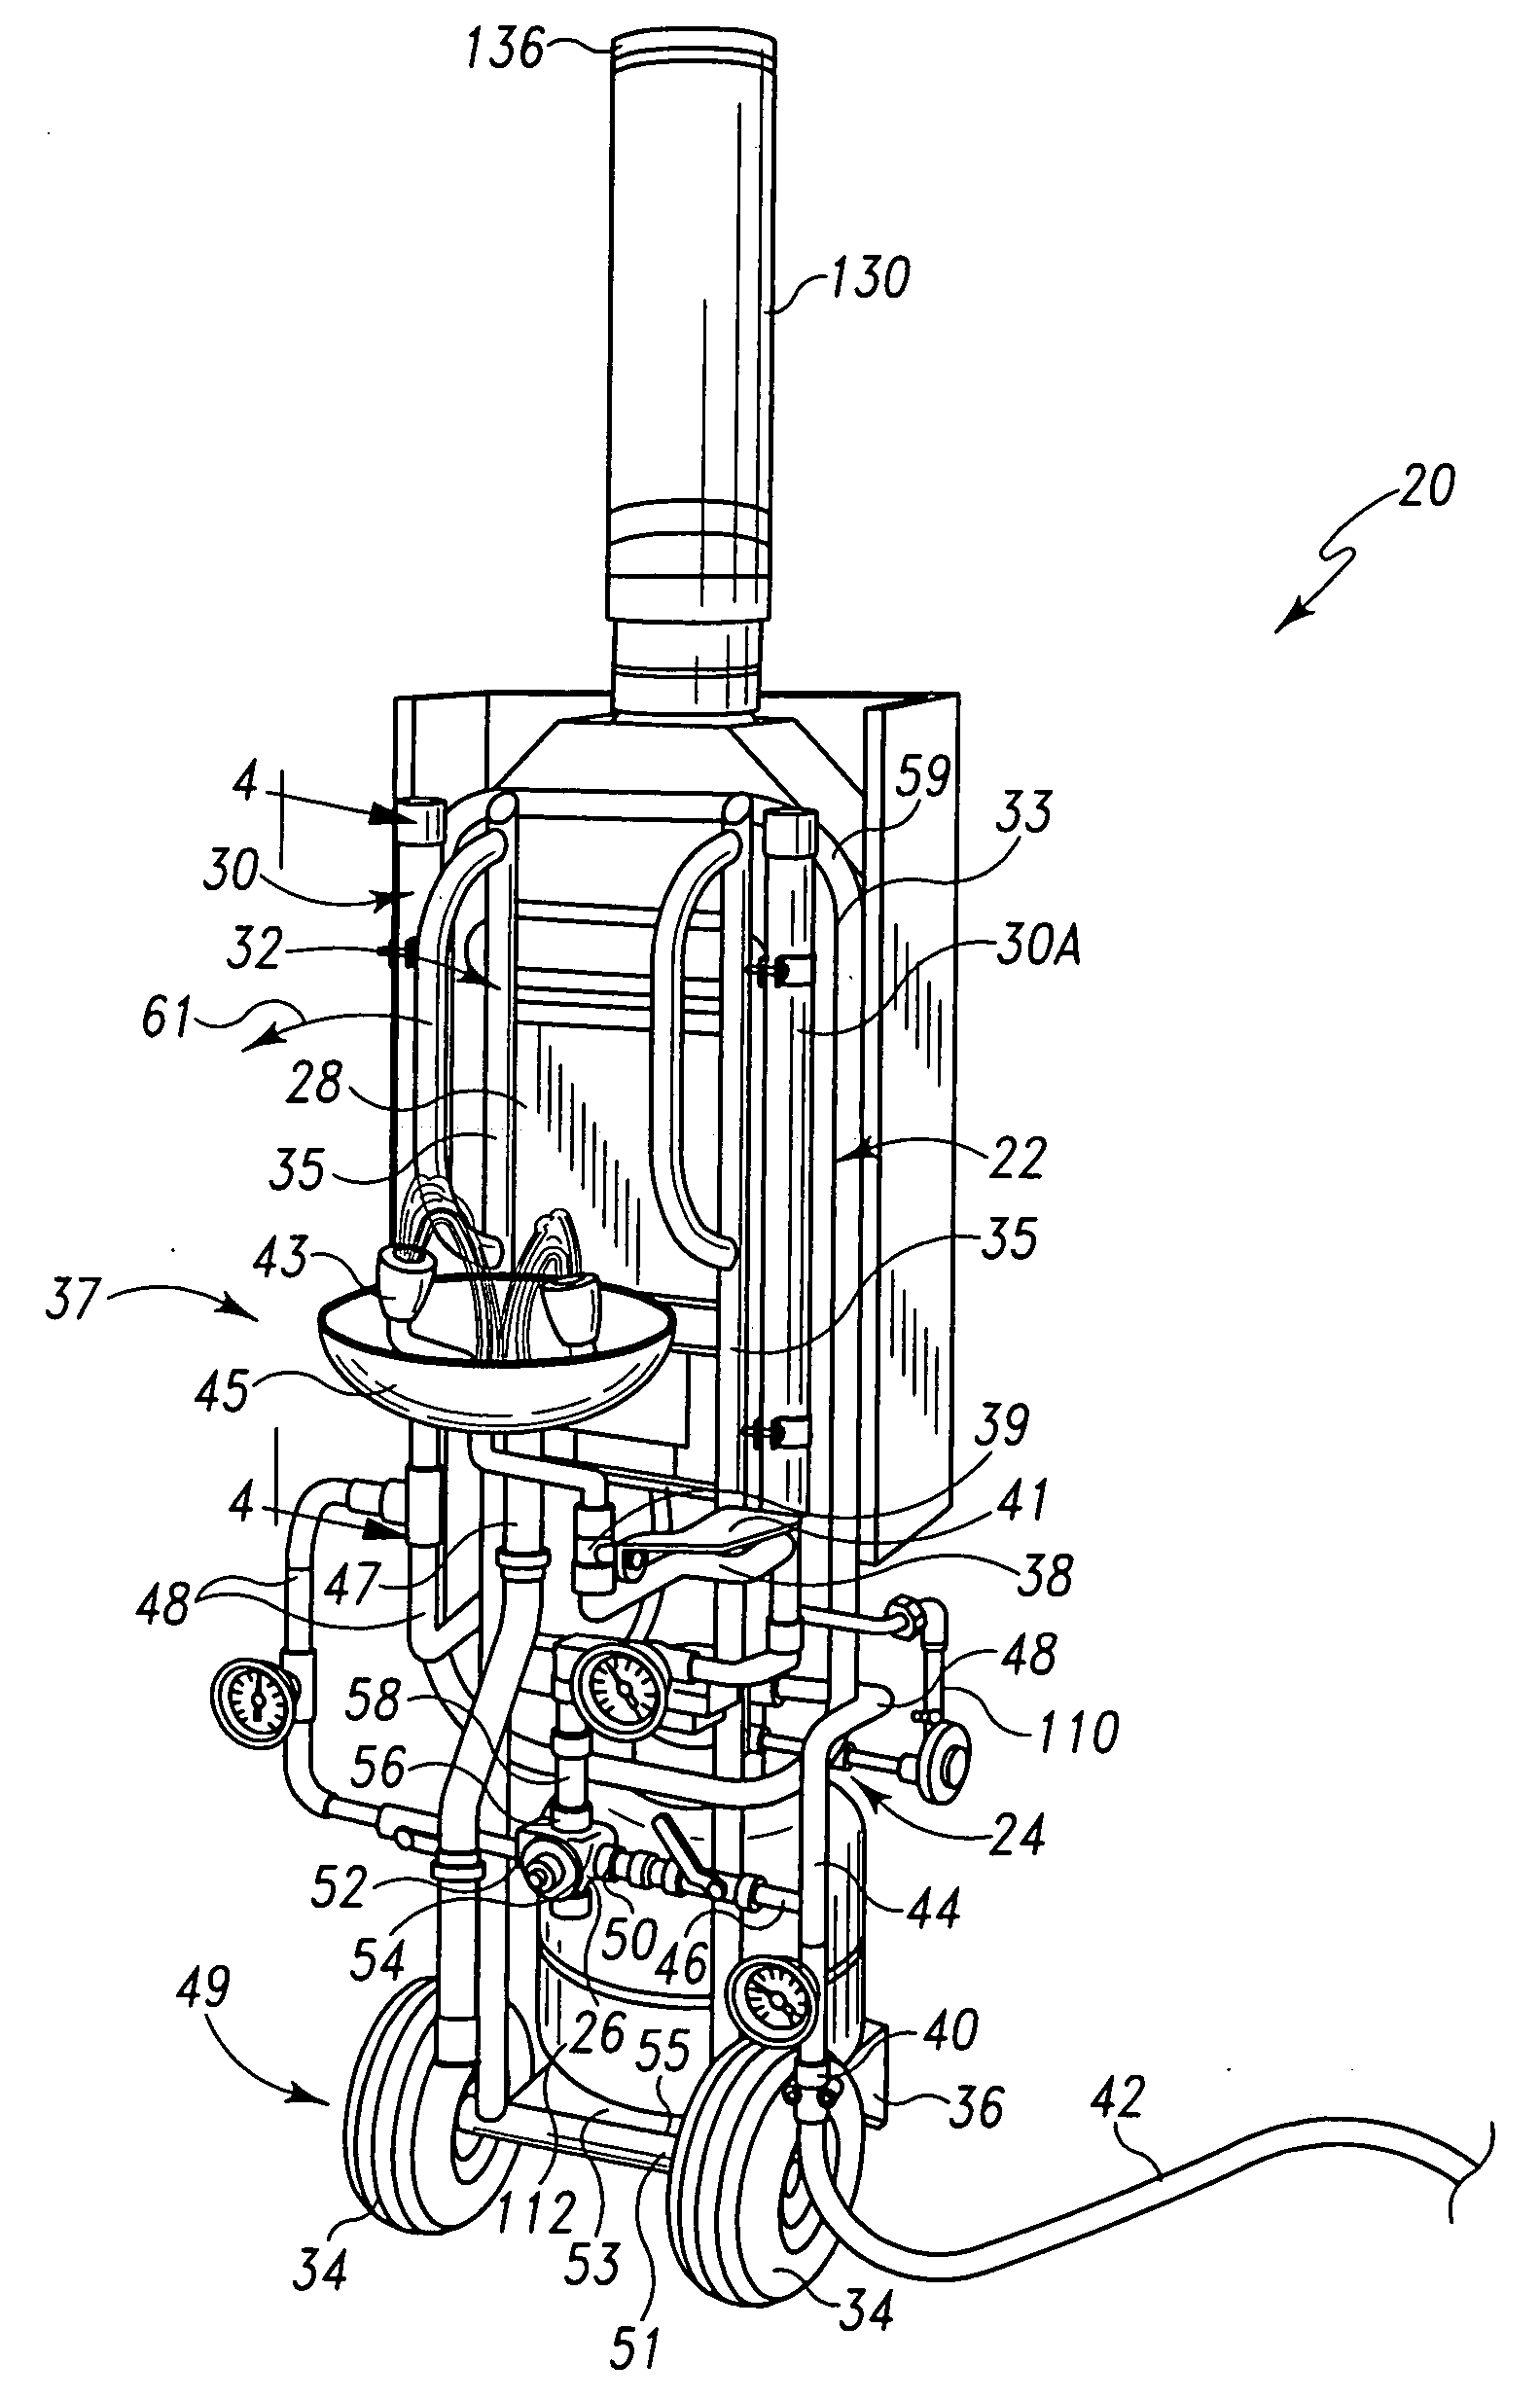 System and method for providing tempered fluid